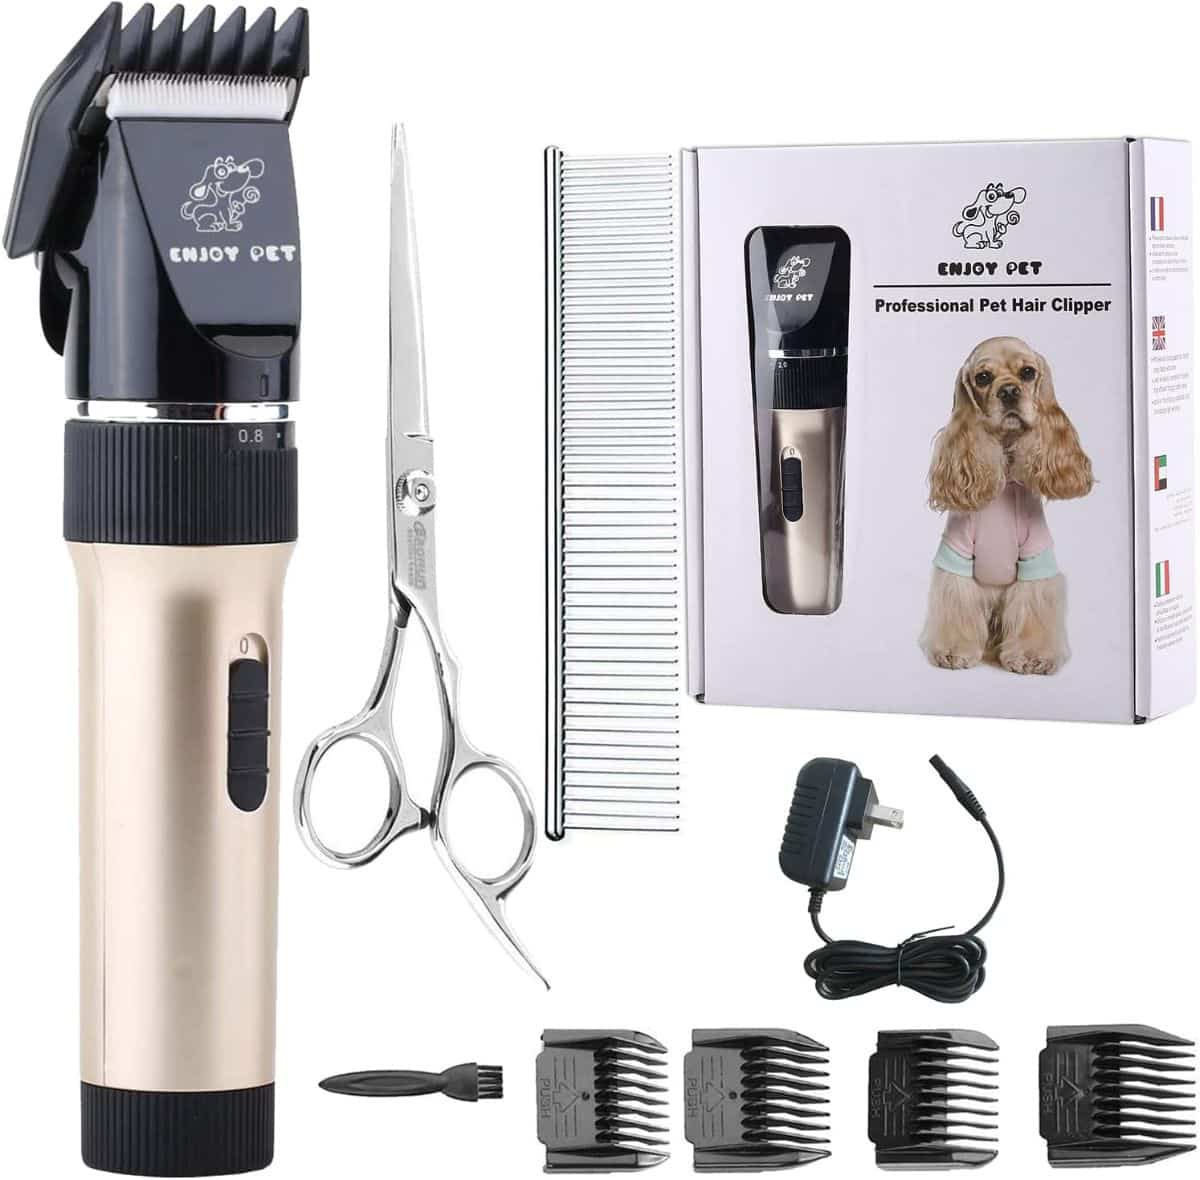 A profesional grooming set for pets.